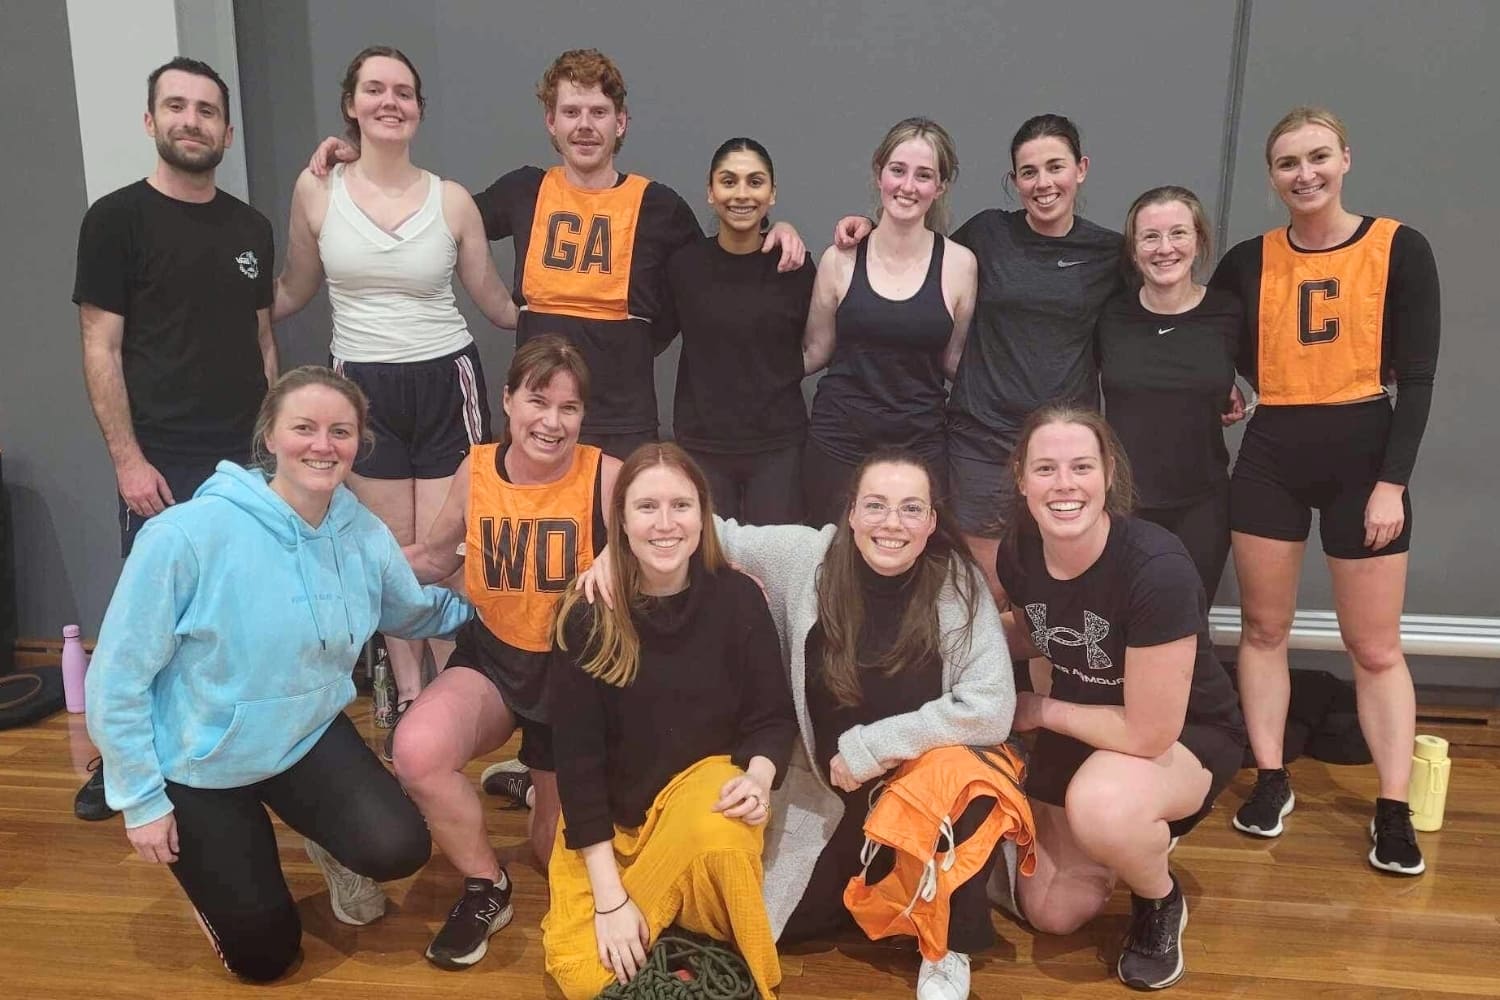 The IRS mixed netball team "The Fumble Force" posing for a team shot